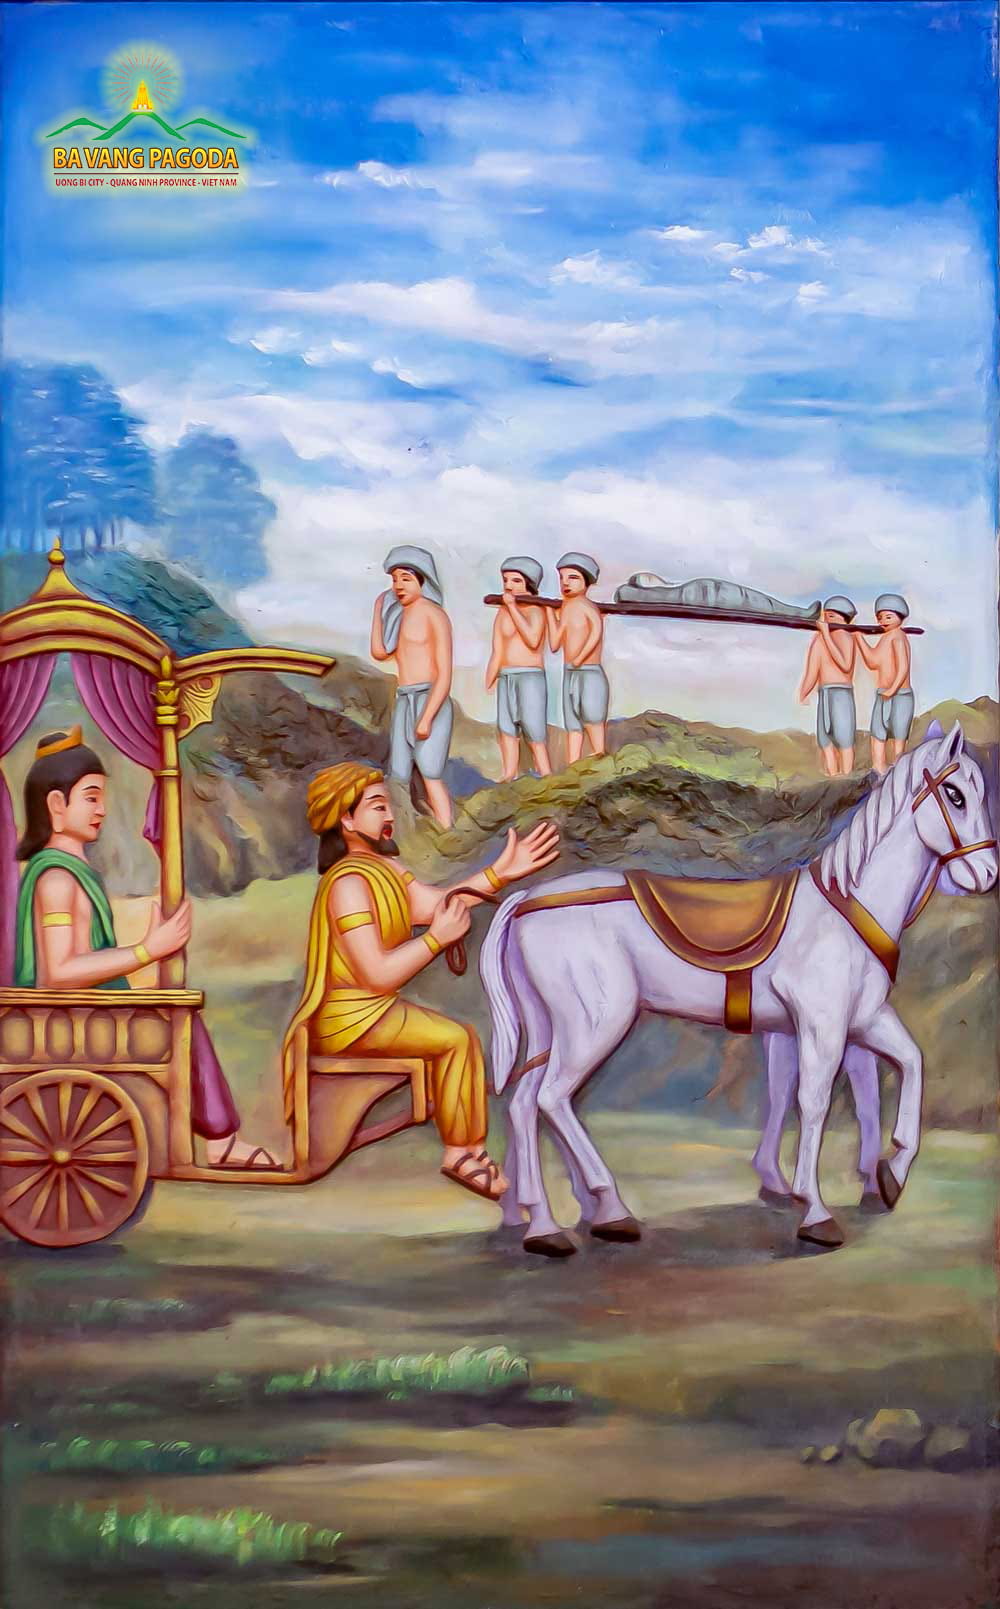 For the third time left the palace, Prince Siddhartha met people carrying a stretcher, on which they laid a person.